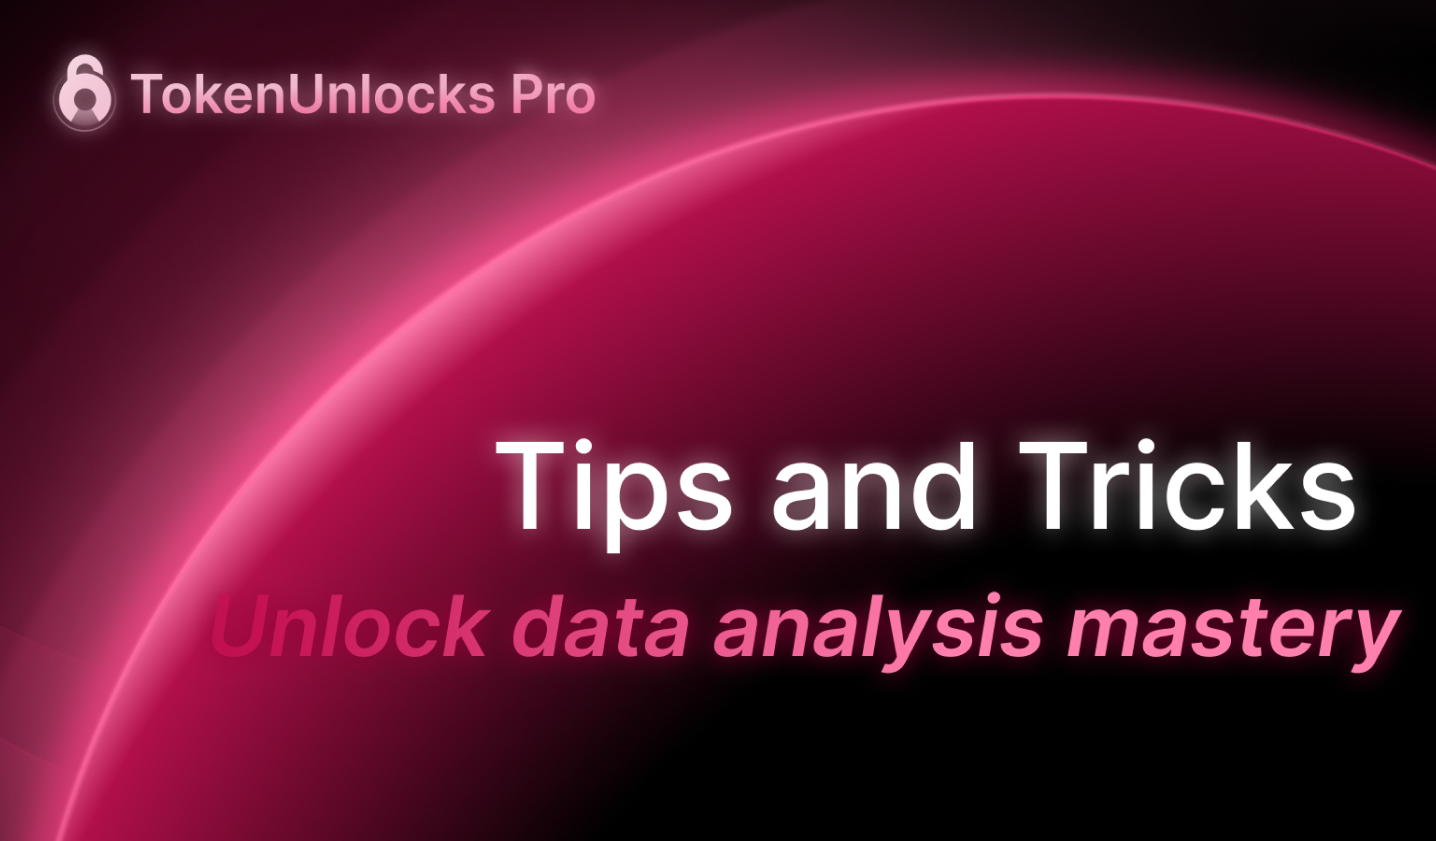 Unlock Data Analysis Mastery - Tips and Tricks on TokenUnlocks PRO That You May Not Know